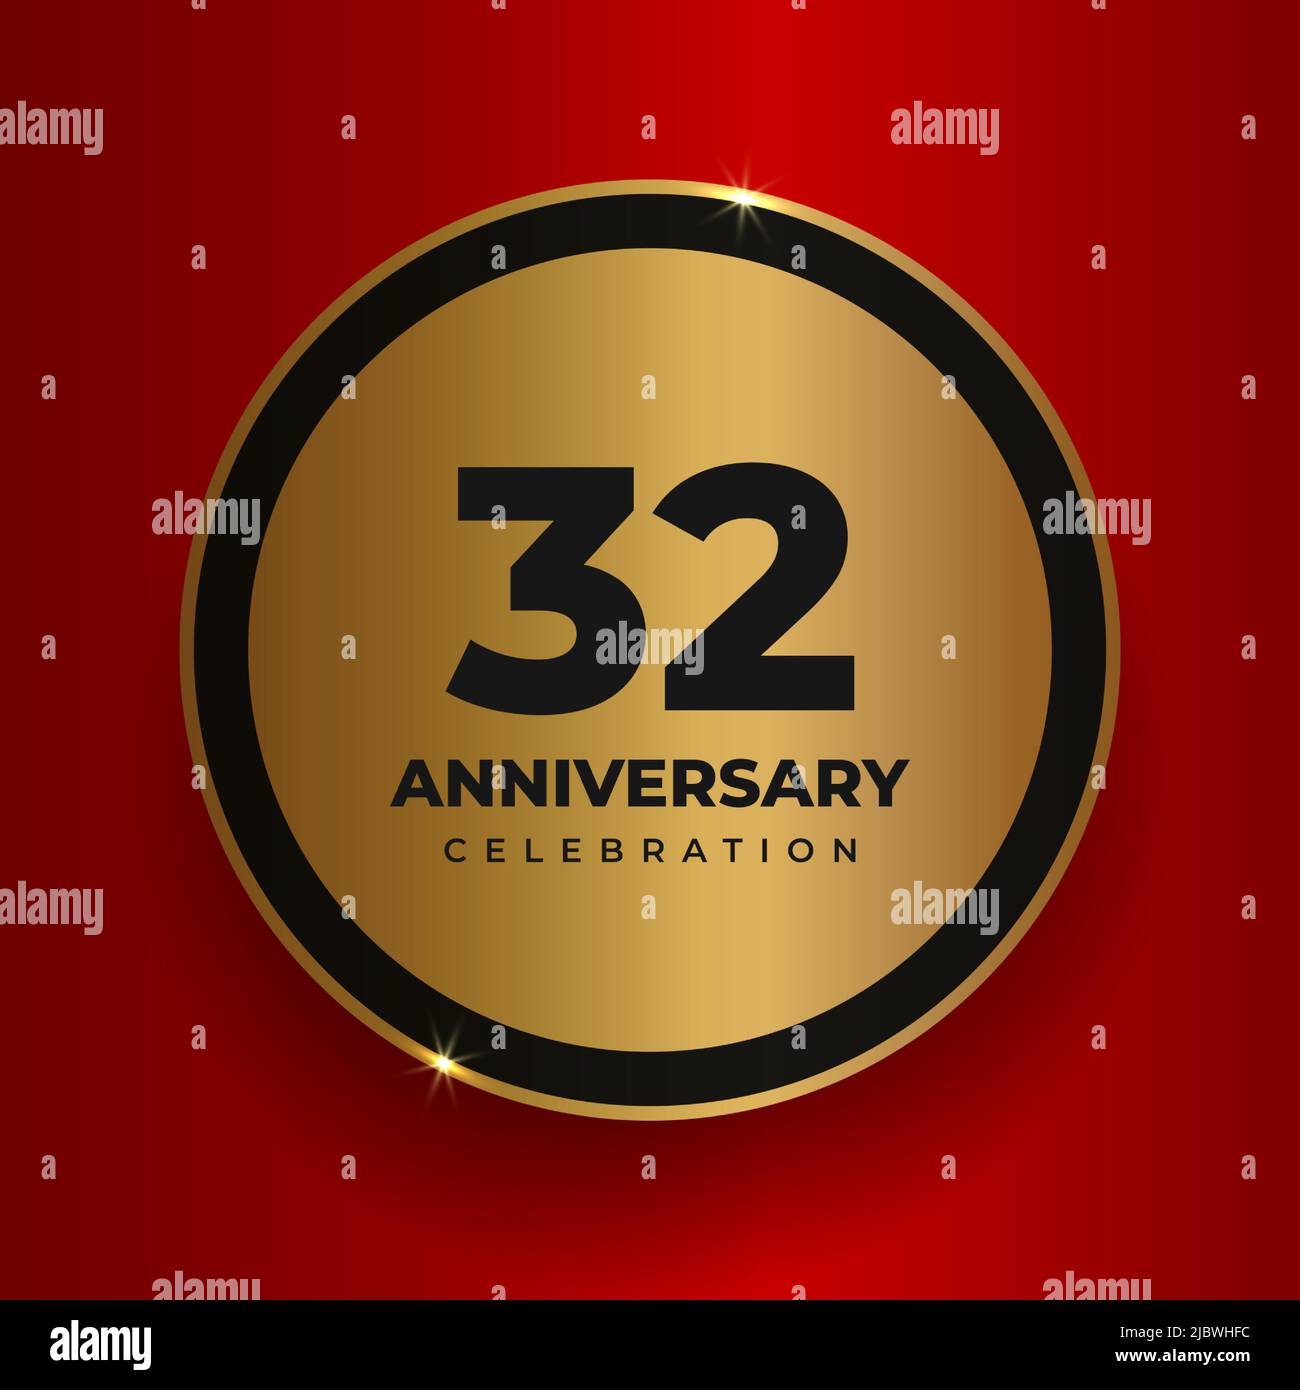 32 years anniversary celebration background. Celebrating 32nd anniversary event party poster template. Vector golden circle with numbers and text on Stock Vector